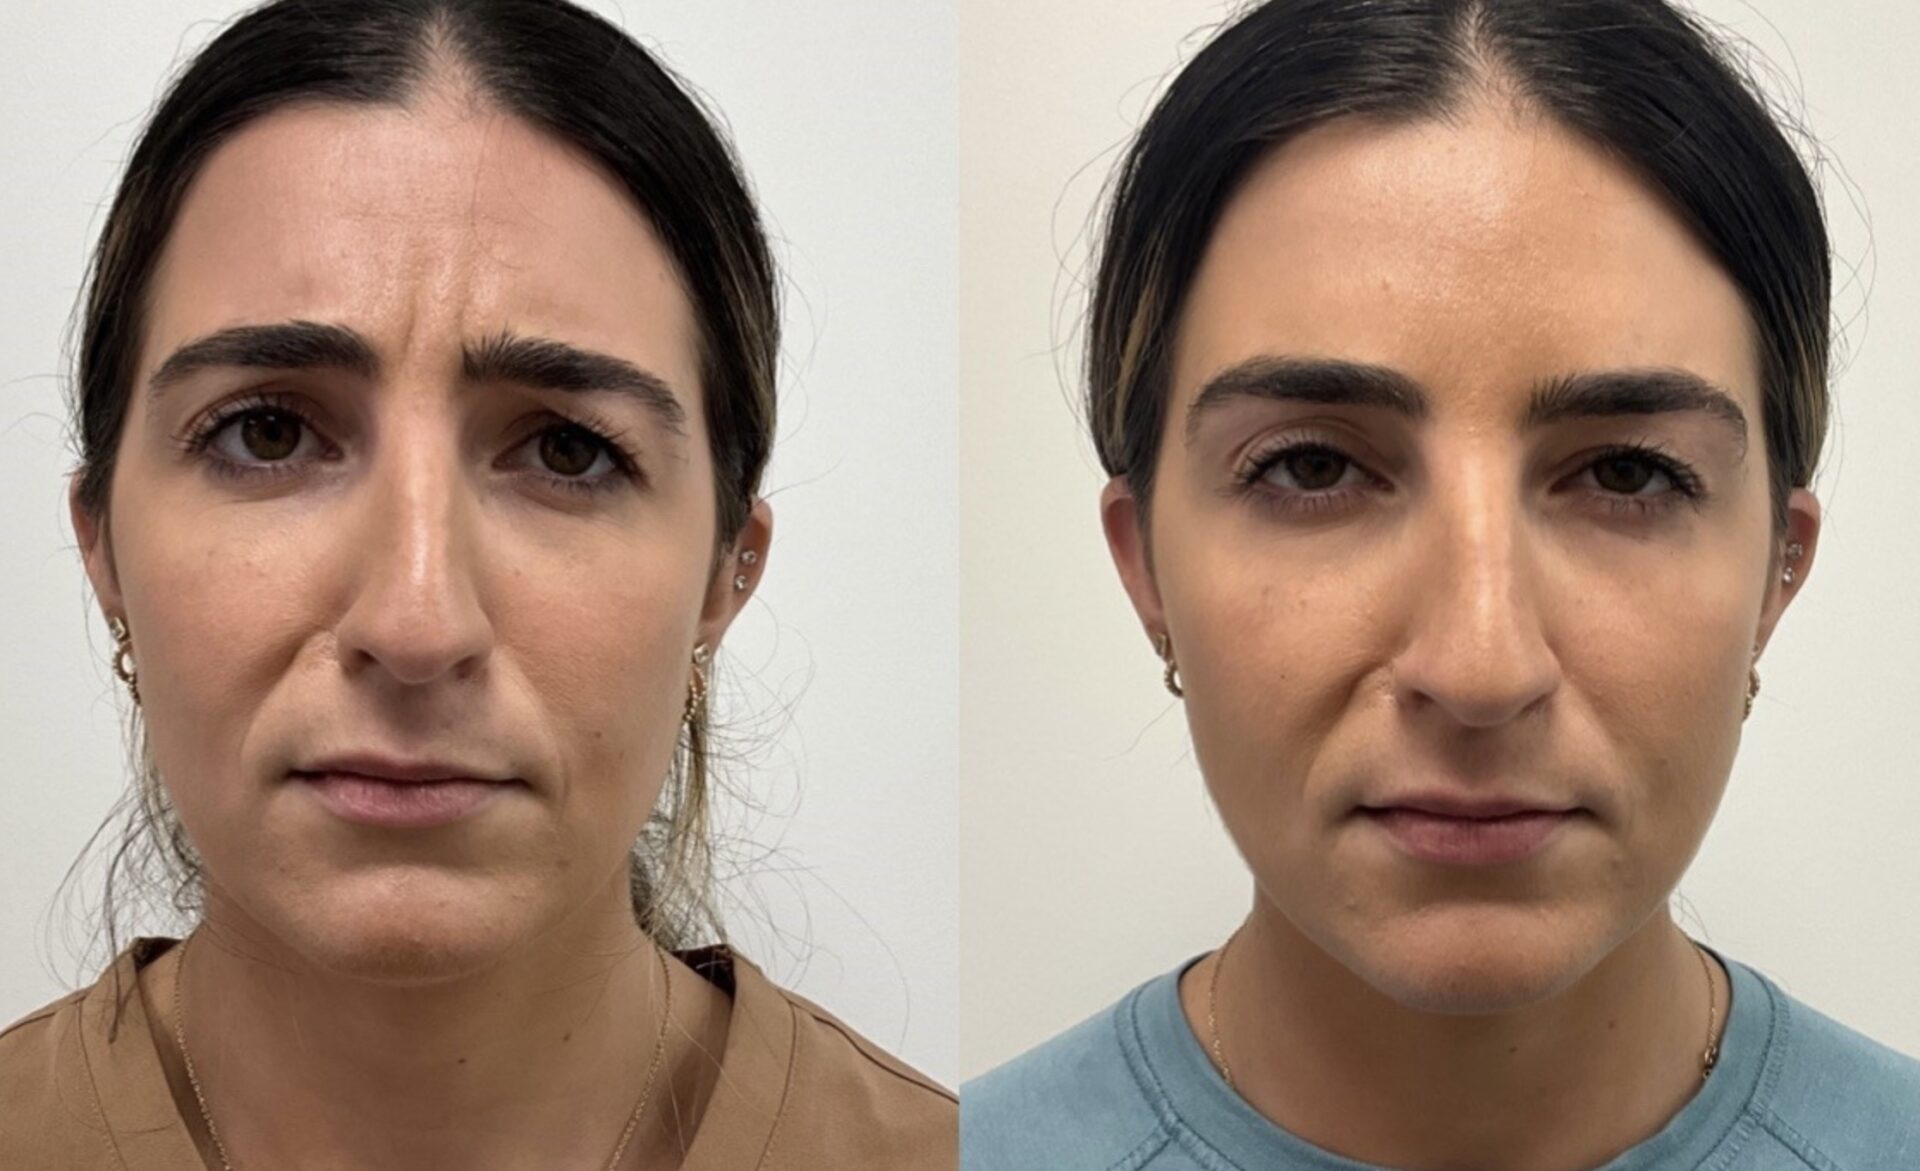 Facial Wrinkles before and after injections | Medical Spa West Palm Beach, FL